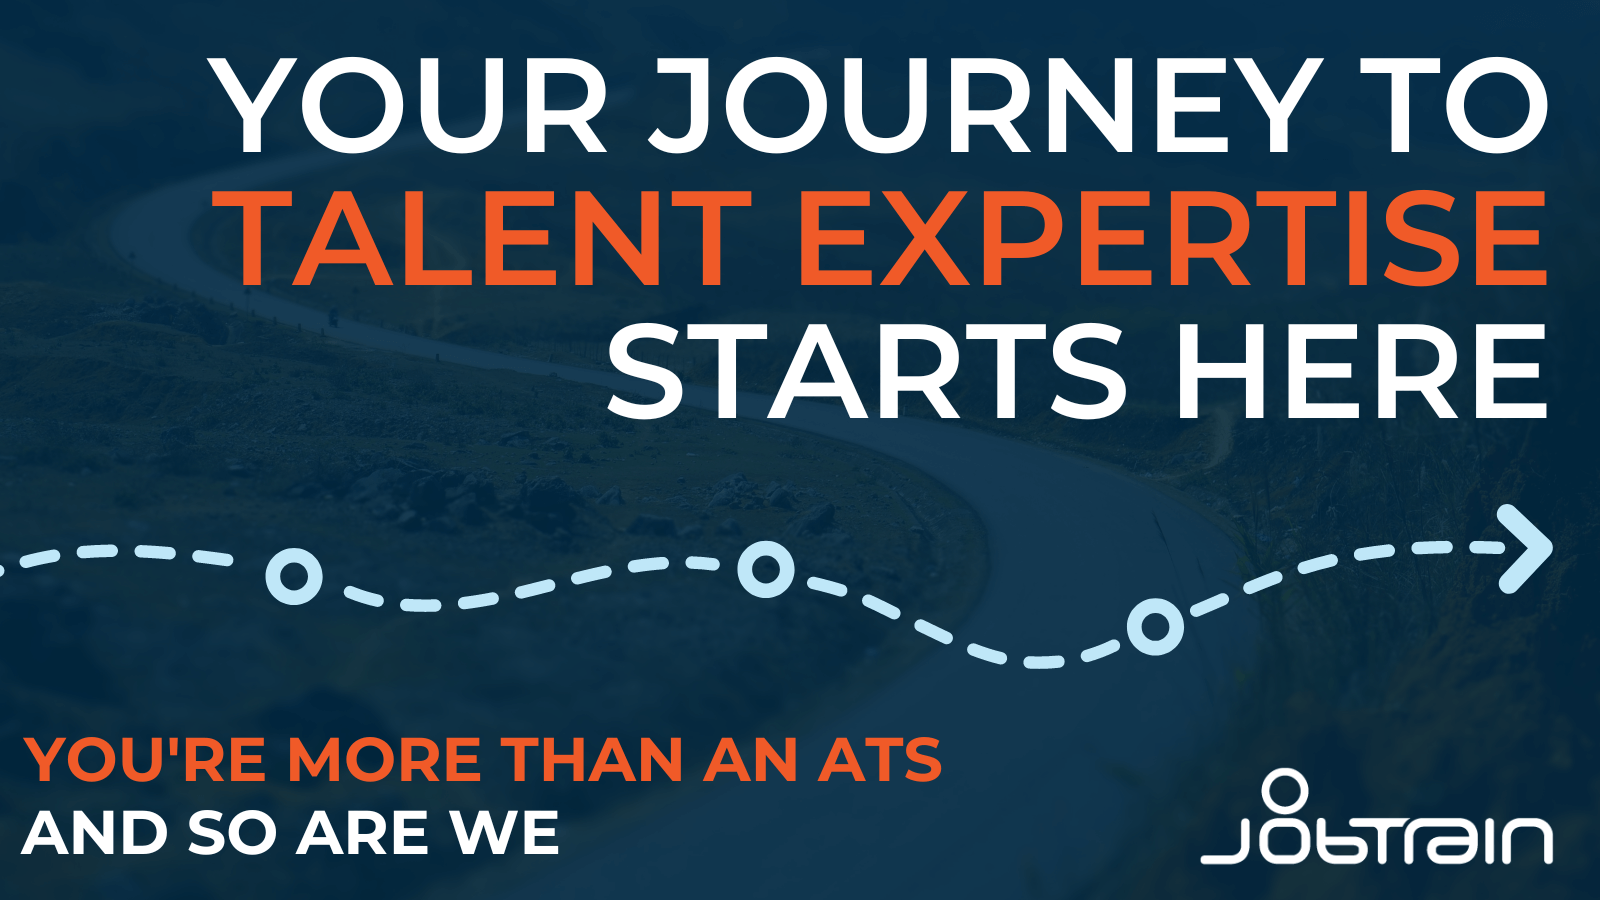 Journey to talent expertise